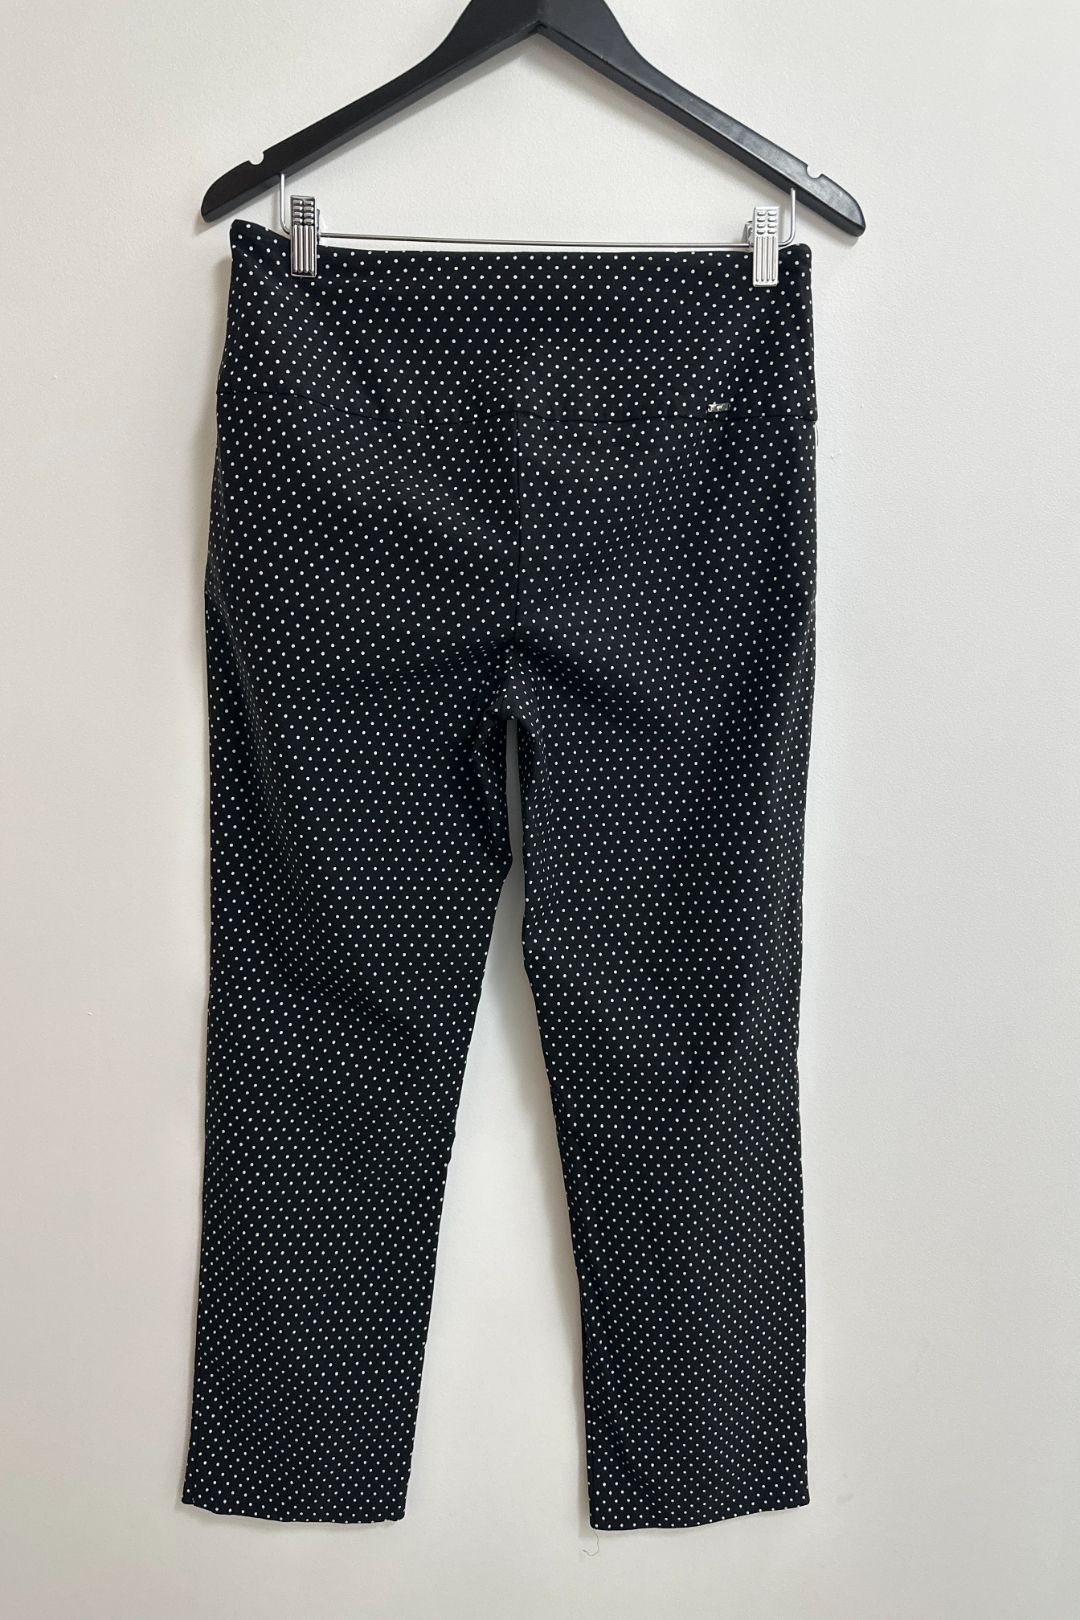 Up! Black and White Spot Stretch Pant 